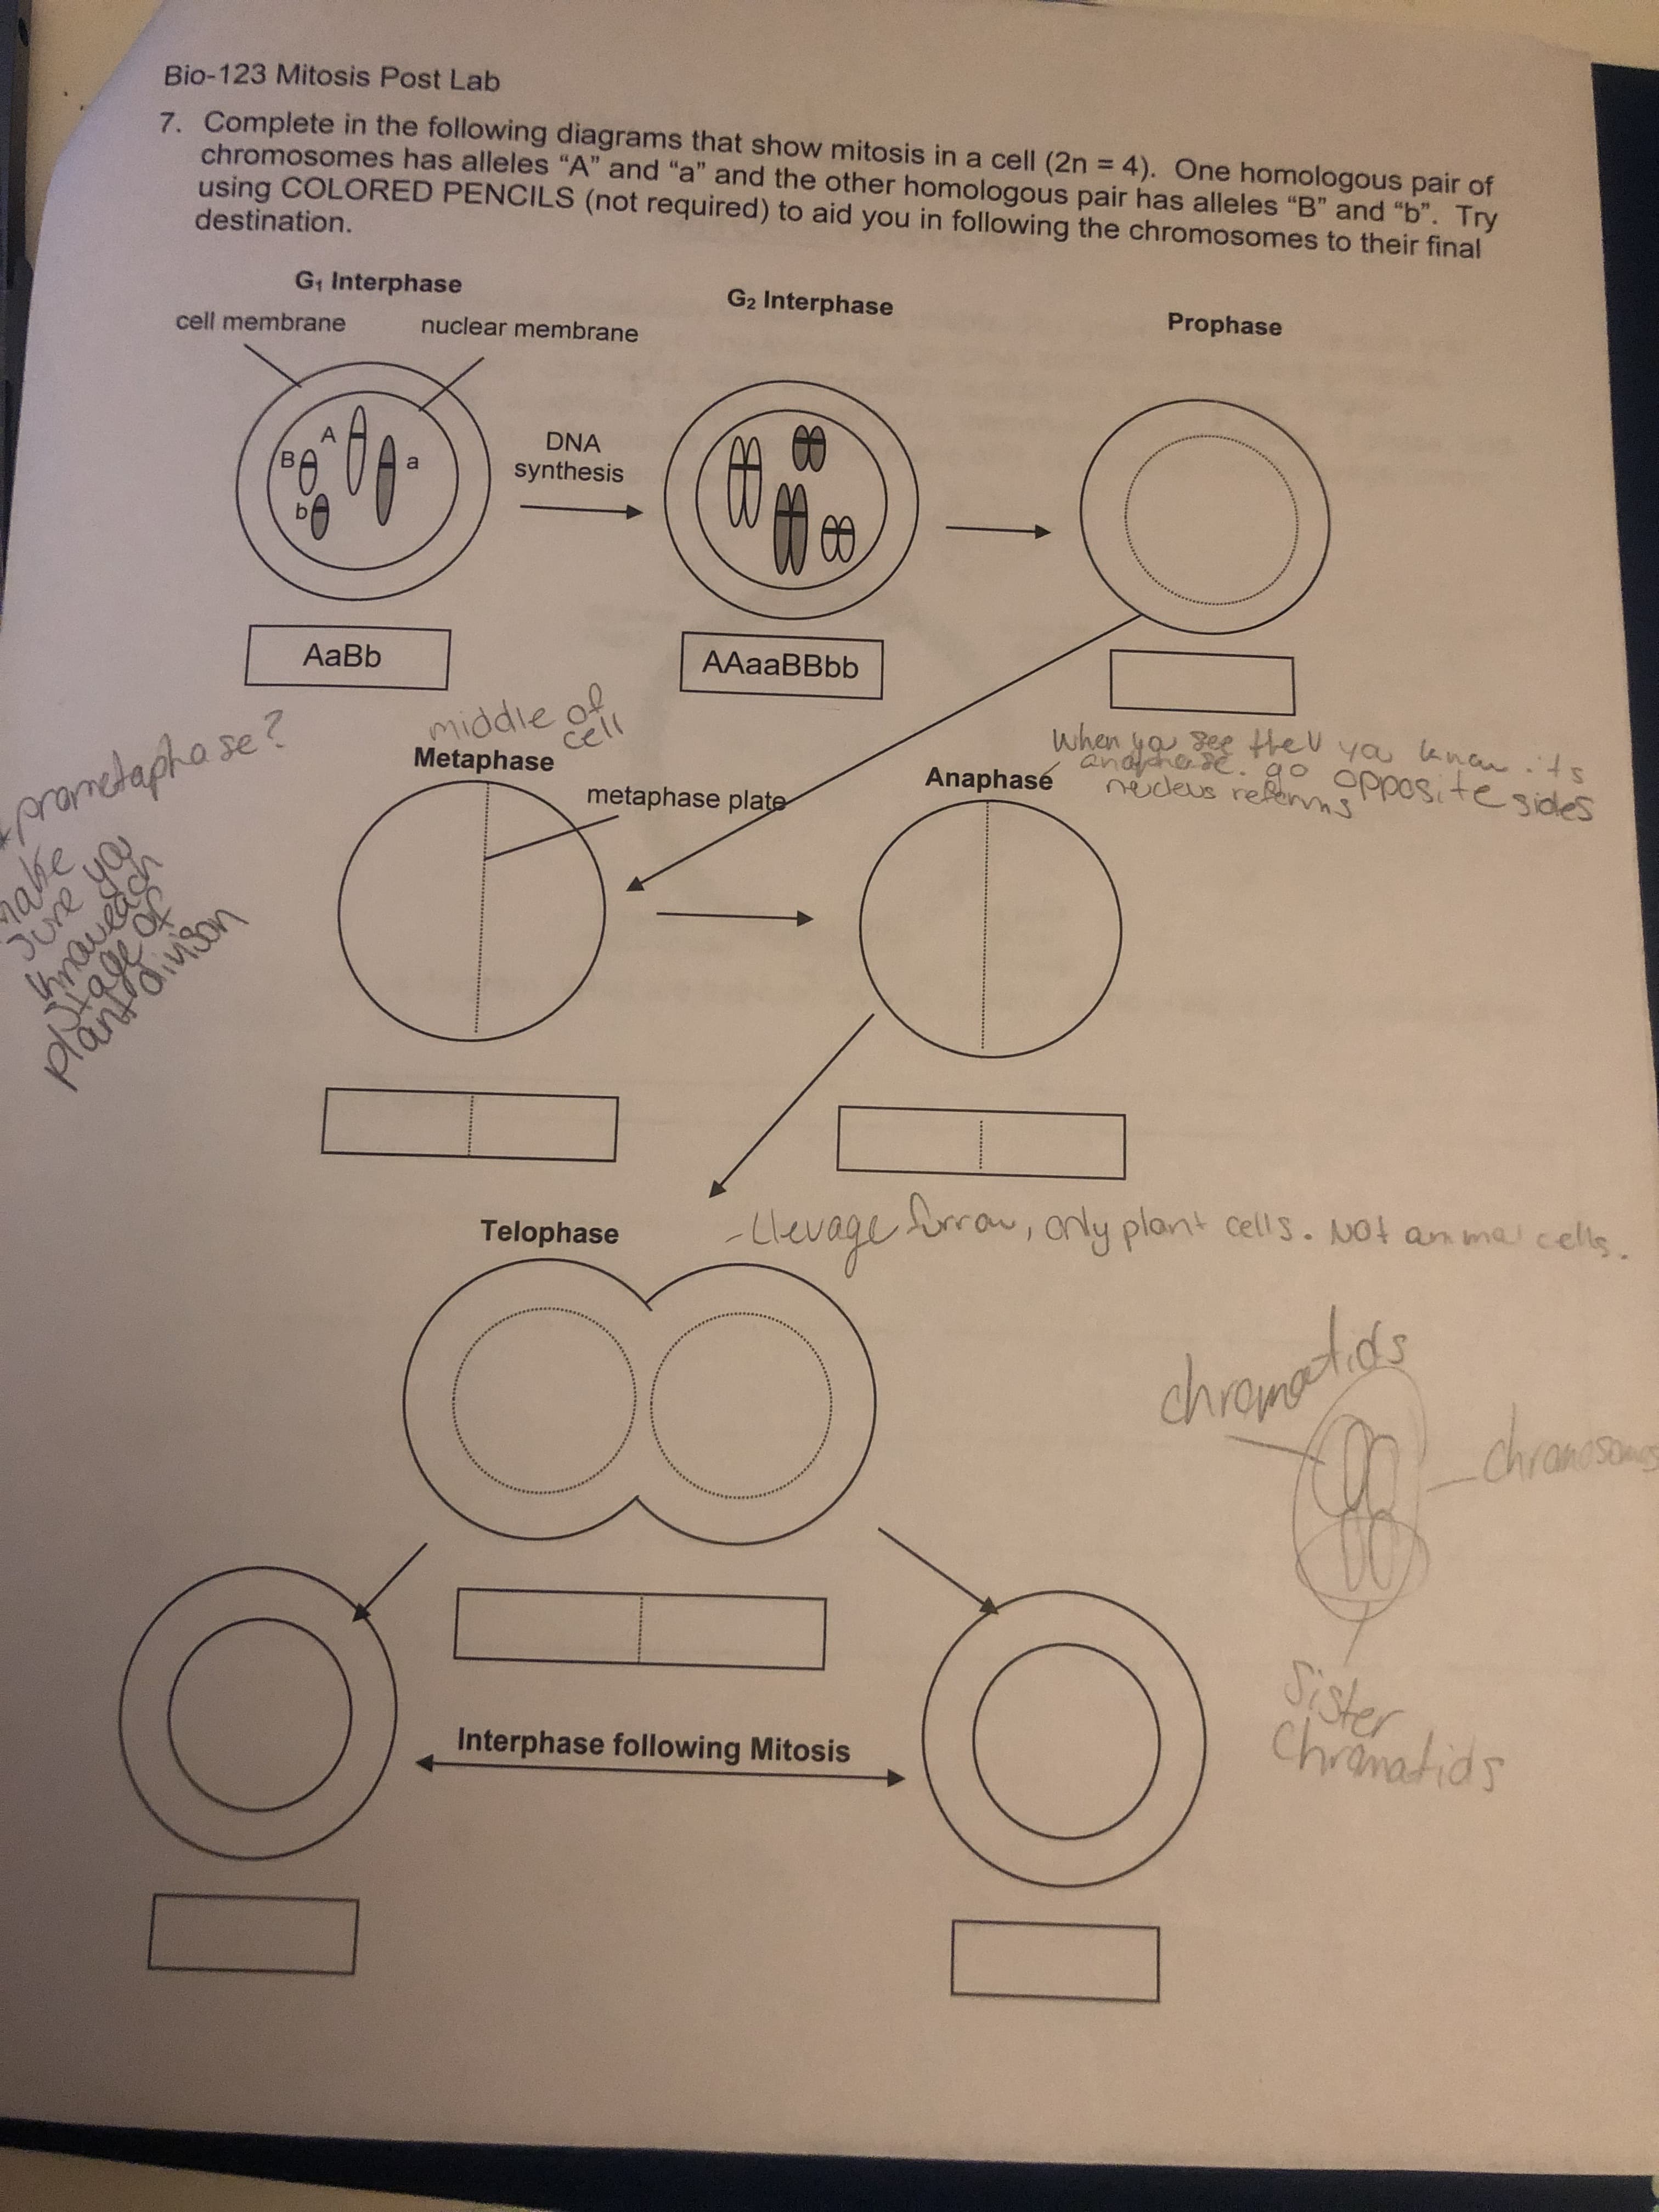 Bio-123 Mitosis Post Lab
7. Complete in the following diagrams that show mitosis ina cell (2n 4). One homologous pair of
chromosomes has alleles "A" and "a" and the other homologous pair has alleles "B" and "b". Try
using COLORED PENCILS (not required) to aid you in following the chromosomes to their final
destination.
Gt Interphase
G2 Interphase
cell membrane
nuclear membrane
Prophase
A
DNA
synthesis
a
AаBb
AAaaBBbb
prandapha se ?
alfe
Jure yau
middie of
cell
when yee theu yau enarts
andfaner a. g oppostesidles
nedeus relerhs
Metaphase
Anaphase
metaphase plate
plantoivison
Uevagra, only plant cell's. Nol an ma cells.
Telophase
chradds
Chrandson
Sister
Chrenahids
Interphase following Mitosis
B
tnaueach
